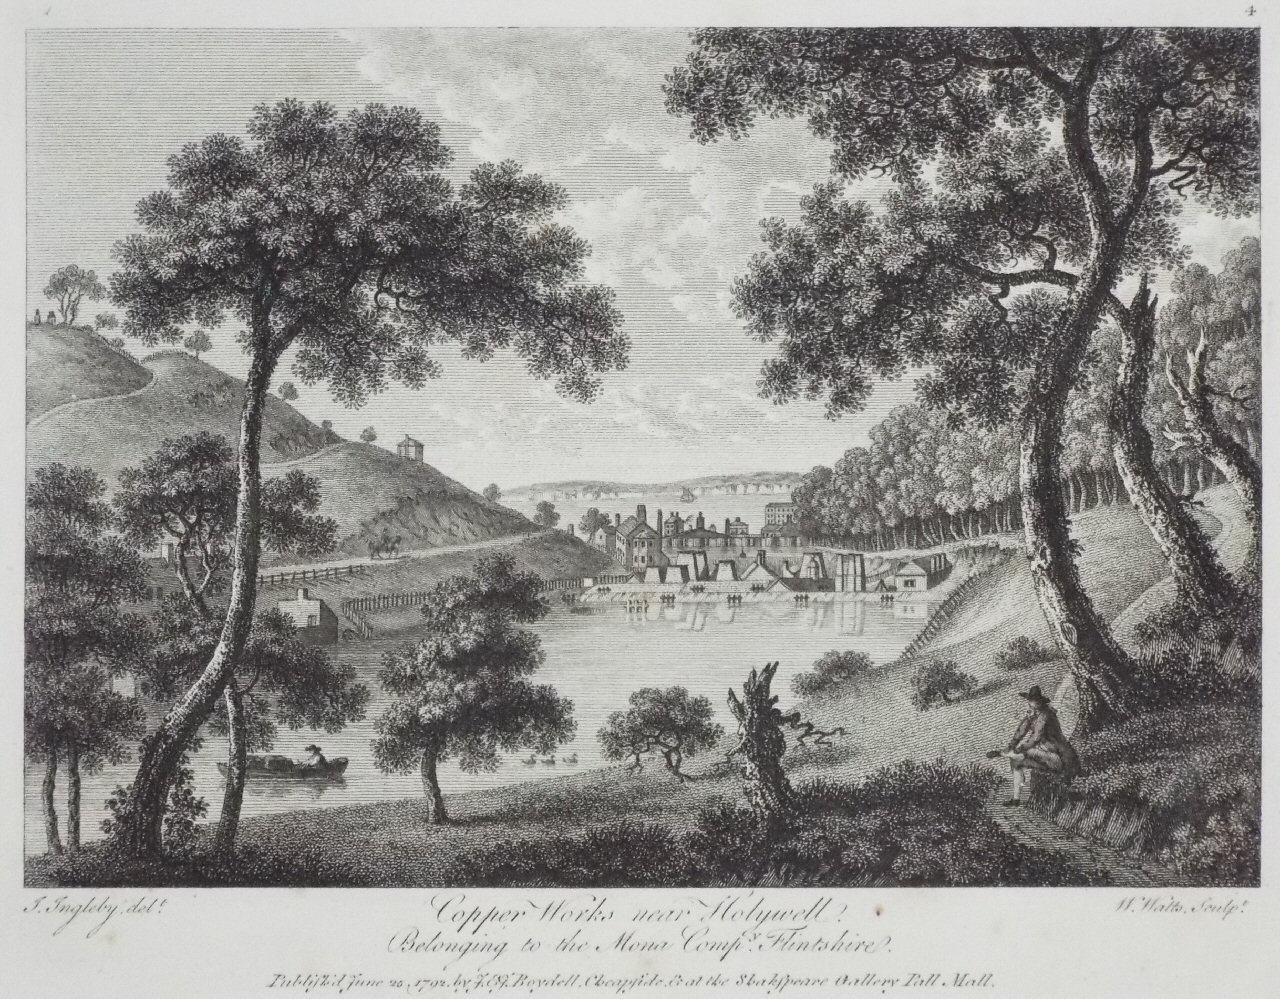 The Parys Mine Company's copper works near Holywell, as they appeared in 1792. The large pond provided water power to the mills below.